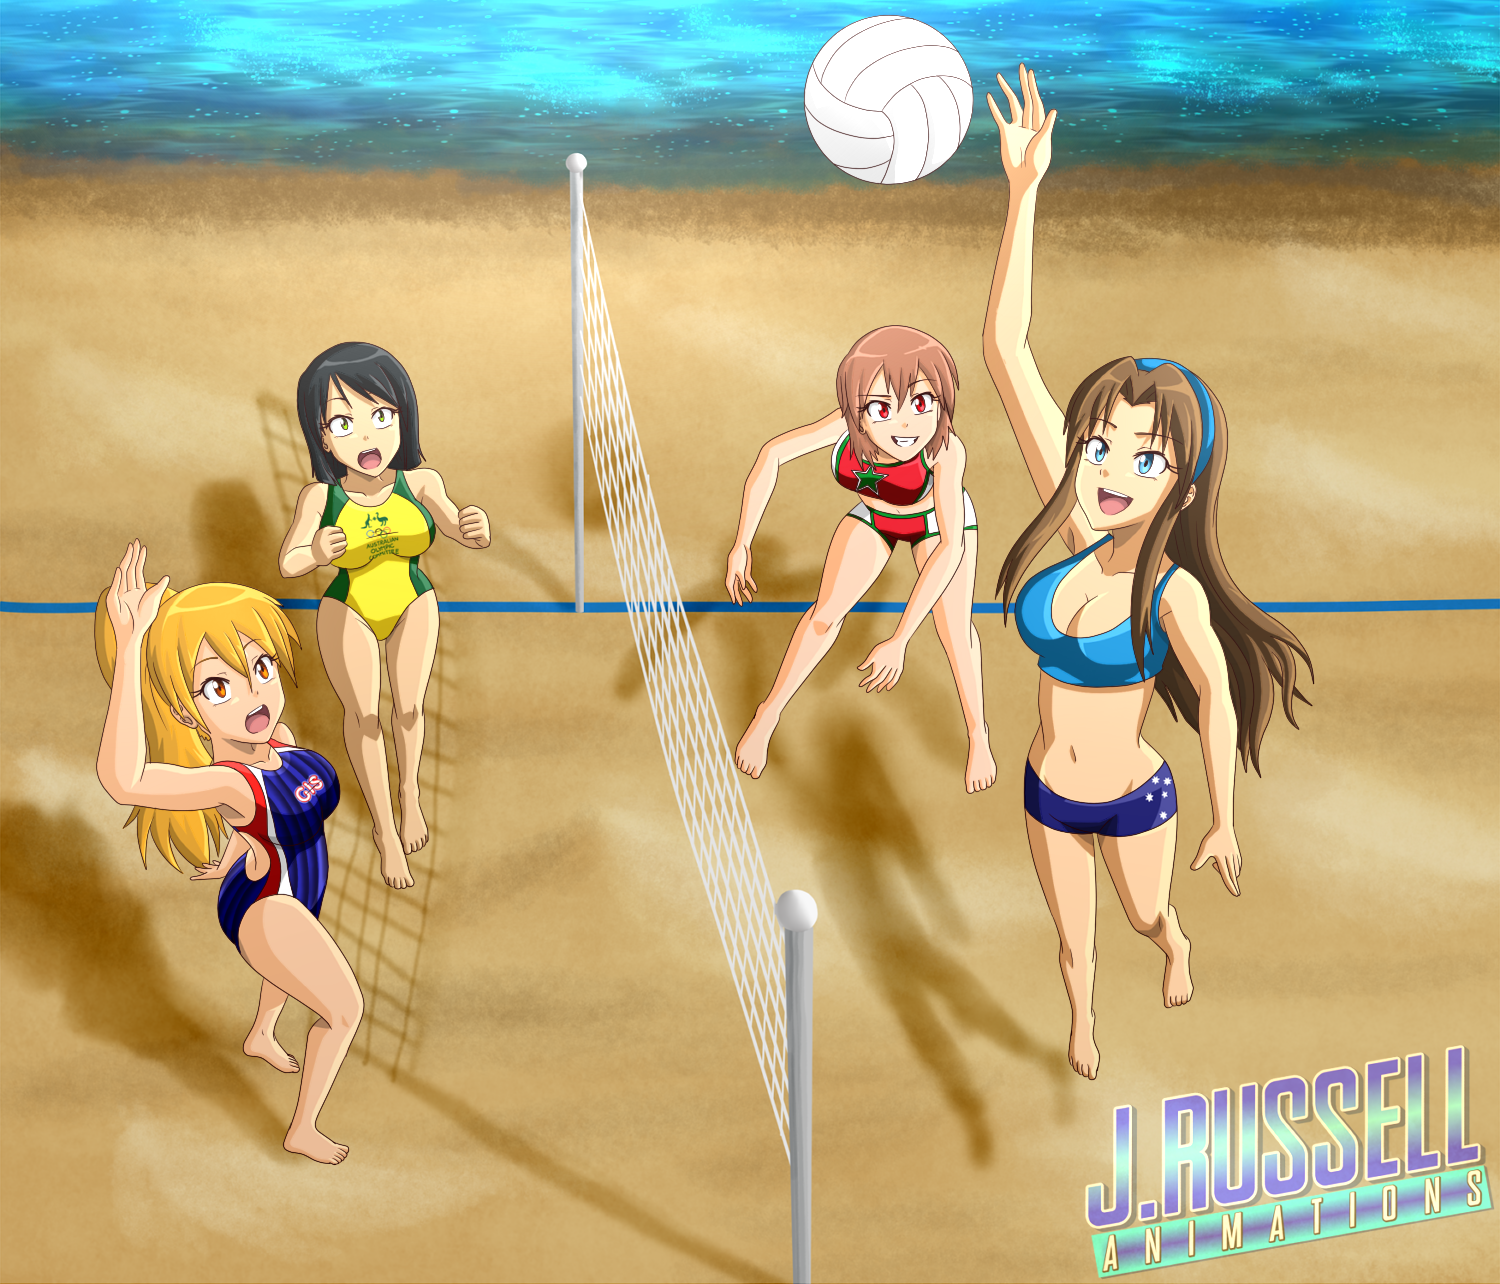 Volleyball Beach match - Besties vs Girls In Swimsuits by JRussellAnimations